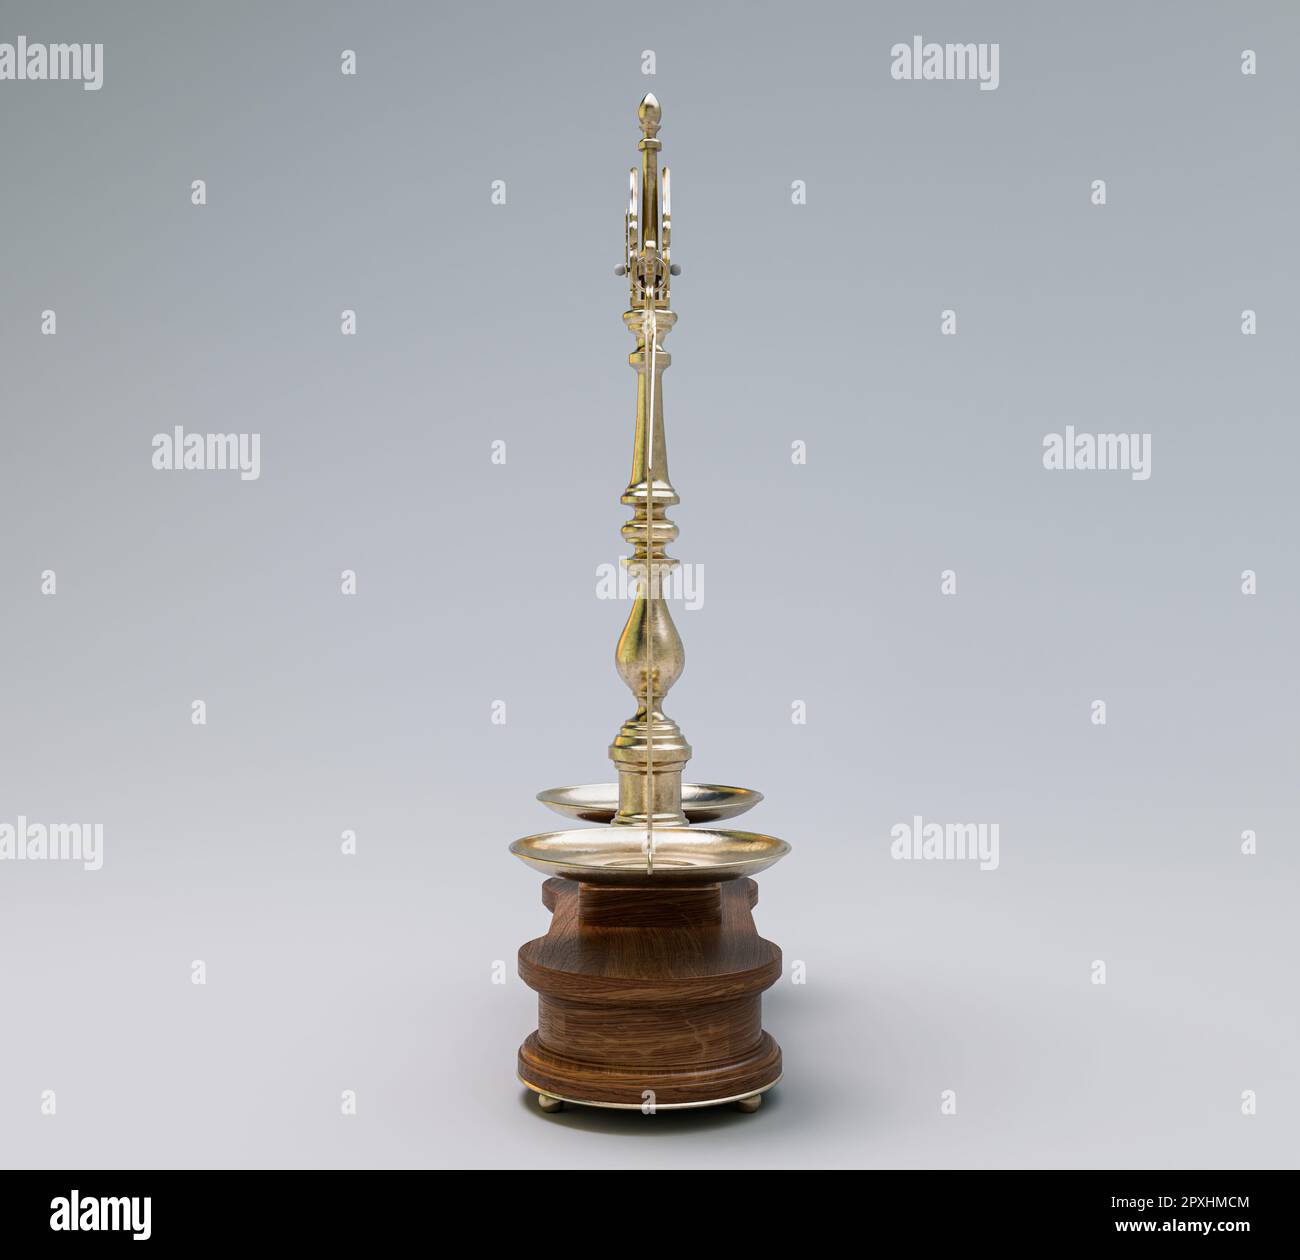 Ornate brass justice scales with a wooden base on a white isolated background - 3D render Stock Photo